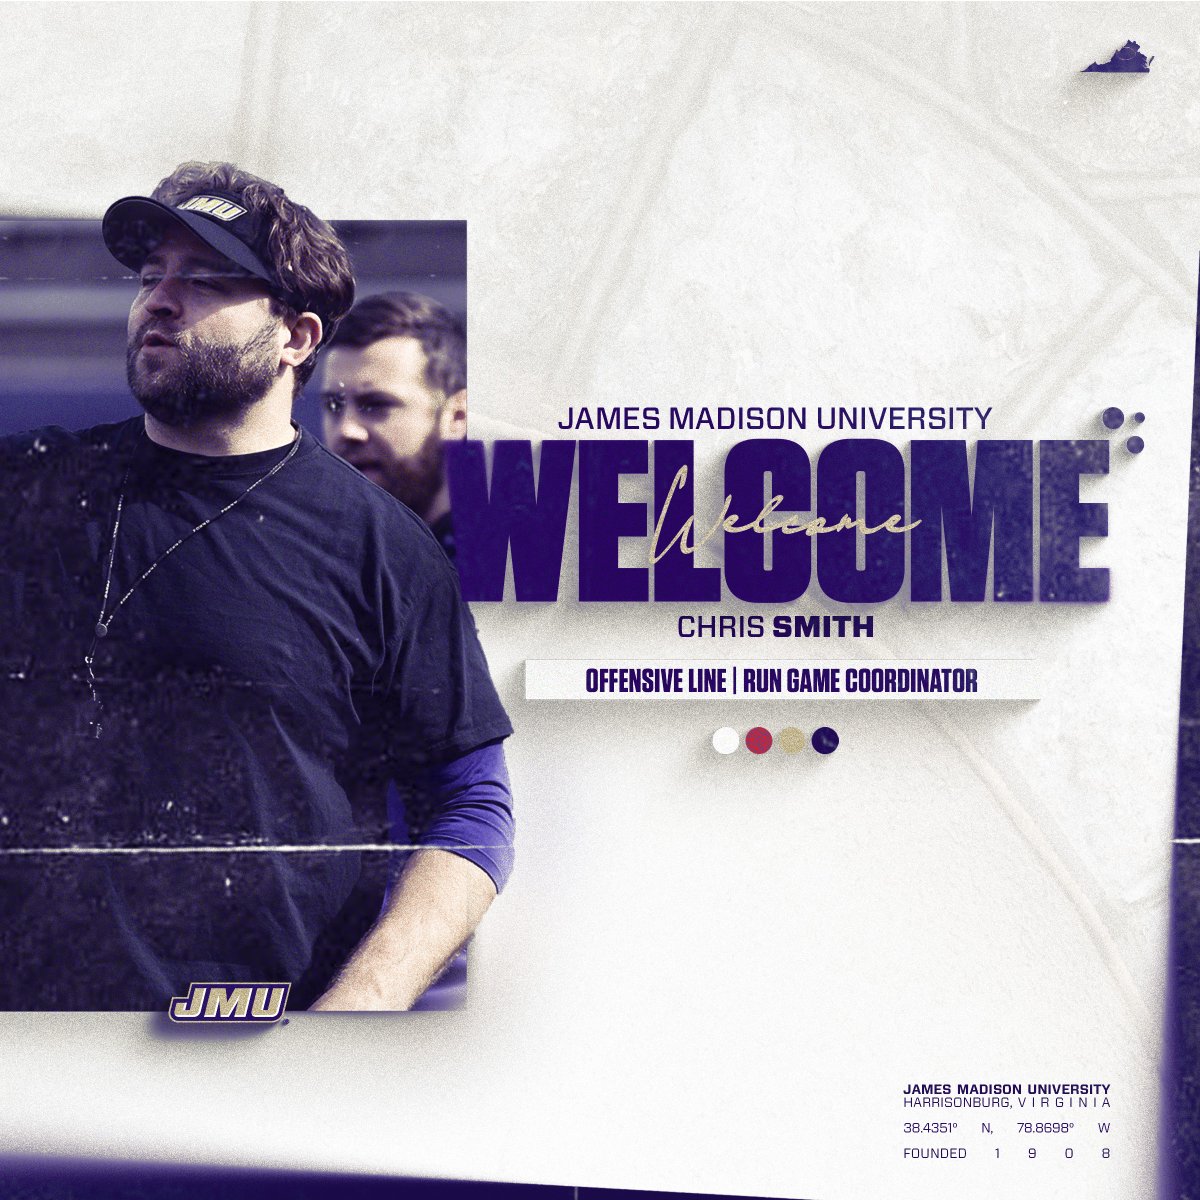 Welcome Home, Coach Smith! Bob Chesney announced the hire of Chris Smith as JMU's new offensive line coach and run game coordinator. 📰 bit.ly/4abjE3X #GoDukes | @Coach_Smith61